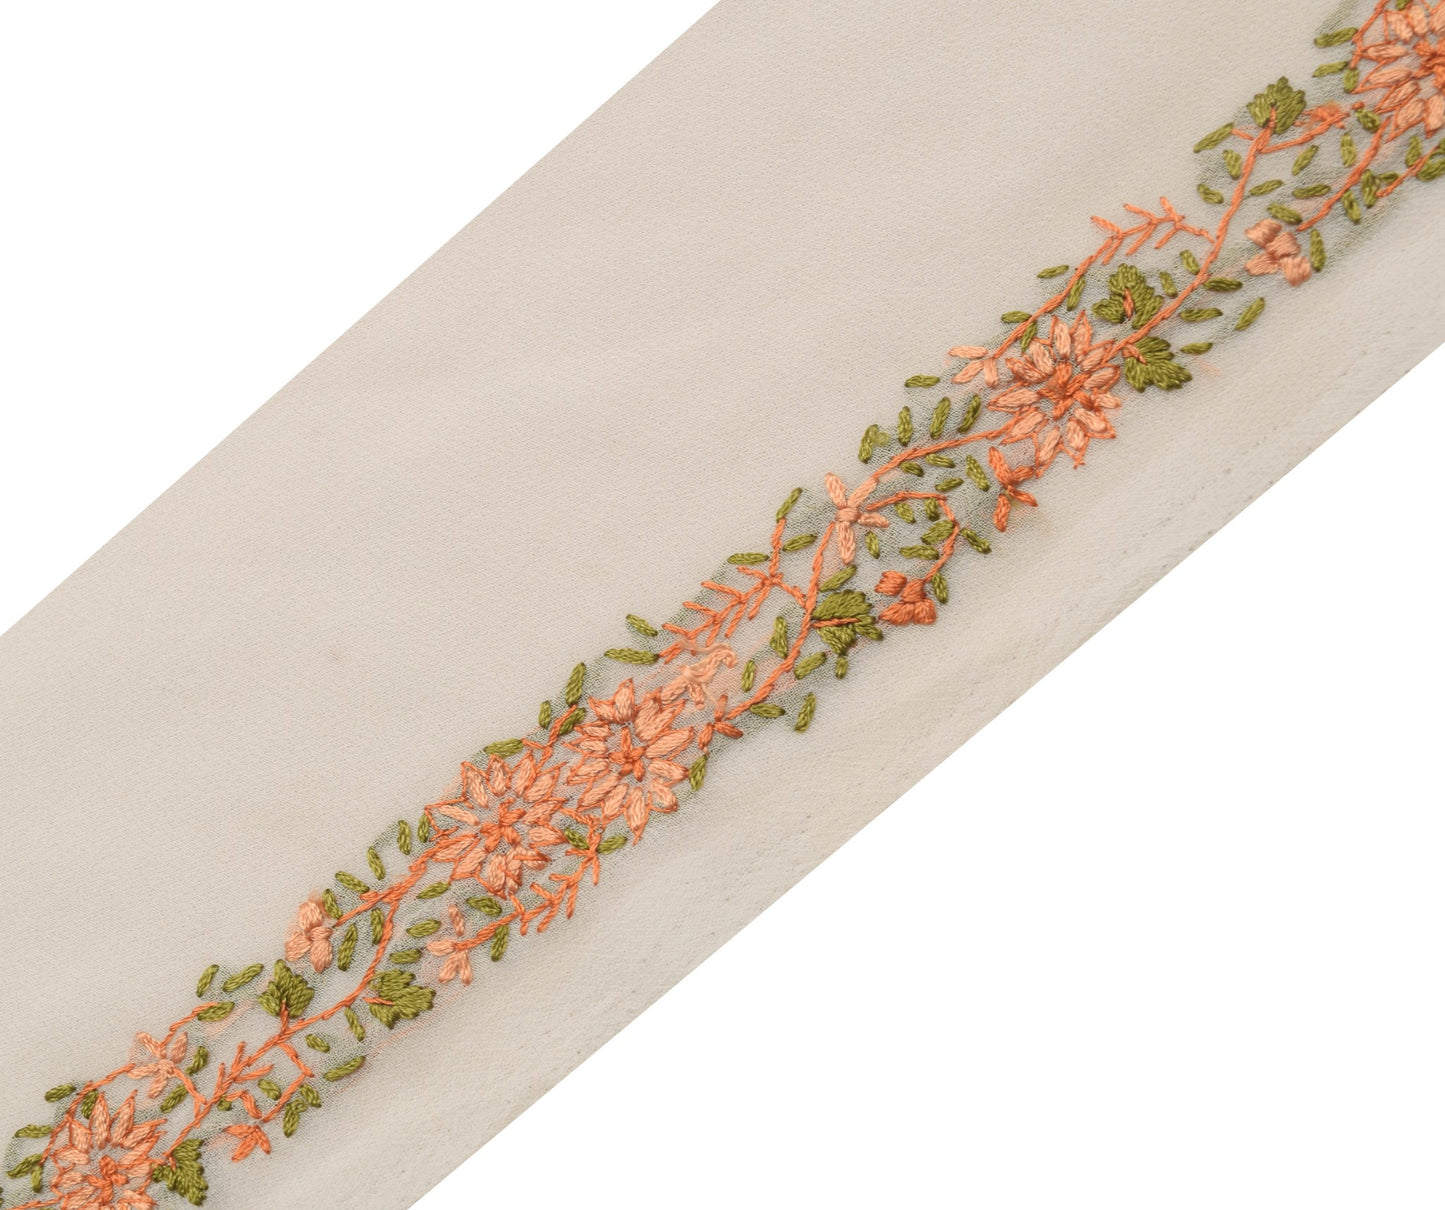 Sushila Vintage White Hand Embroidered Silk Saree Border Craft Sewing Trim Lace